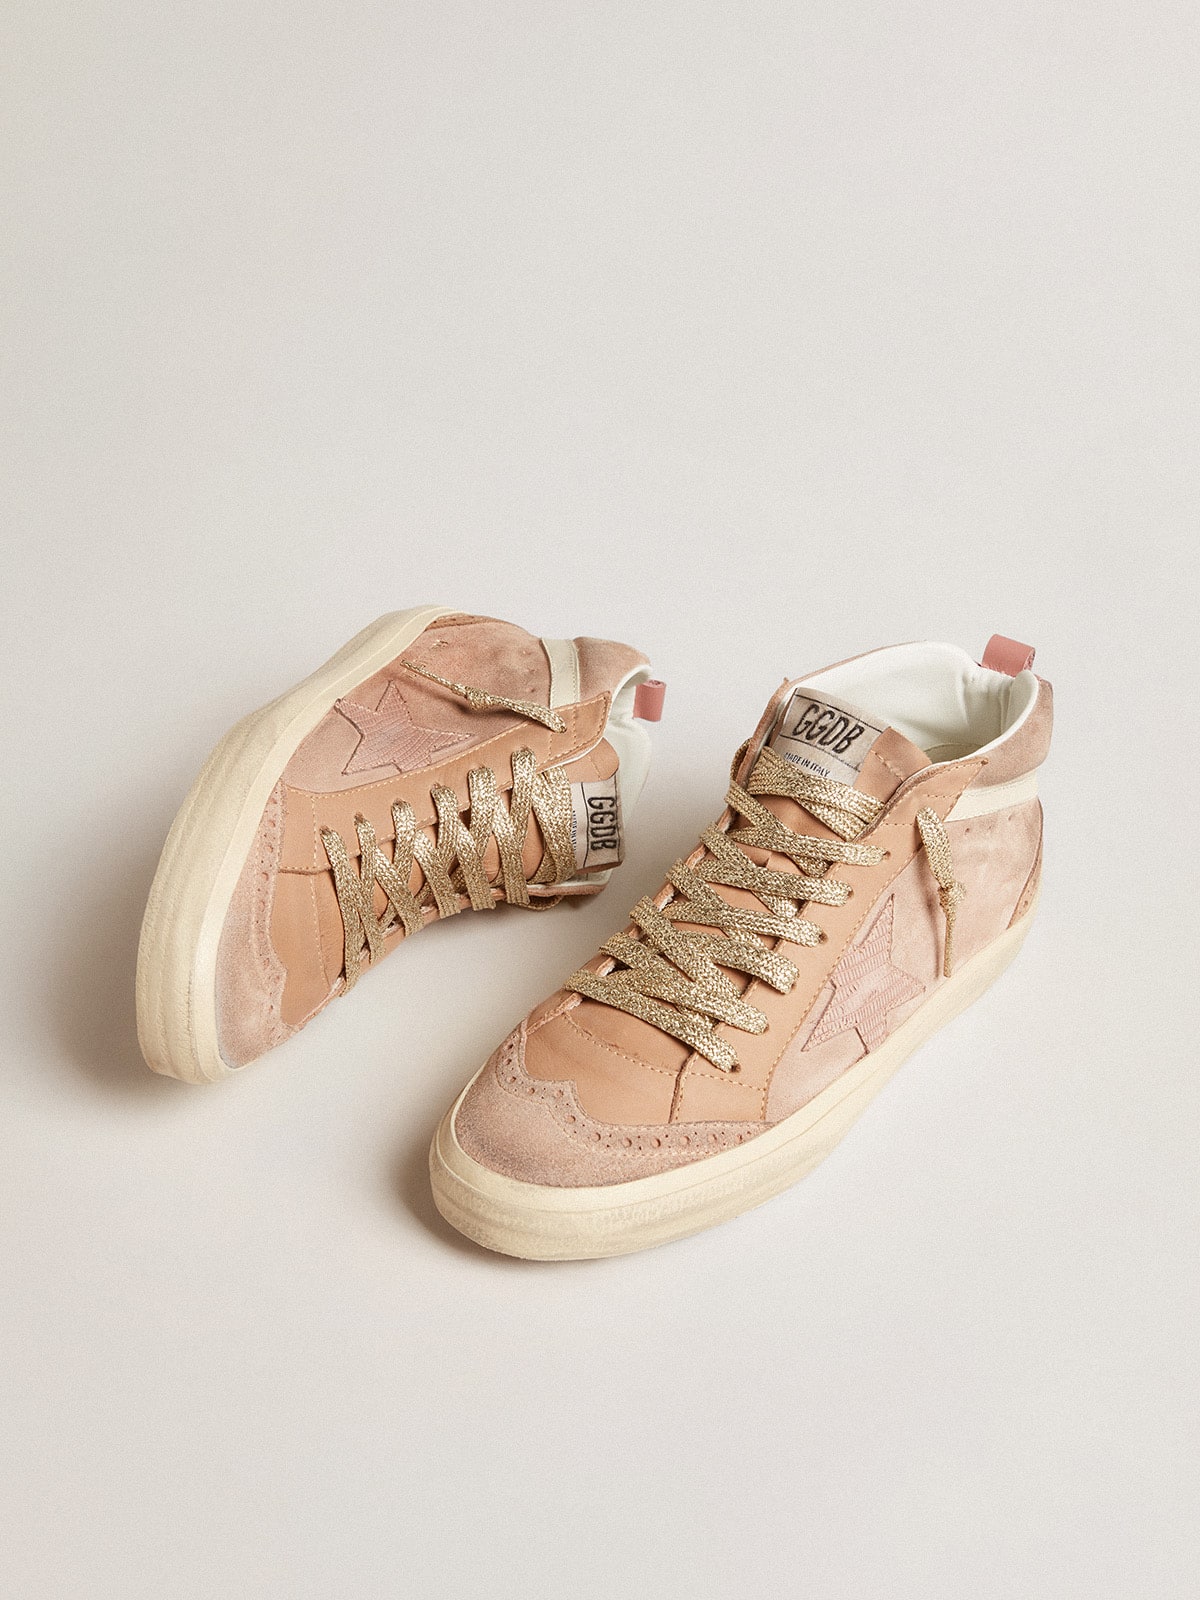 Women's Mid Star LTD in pink suede with pink lizard-print leather 